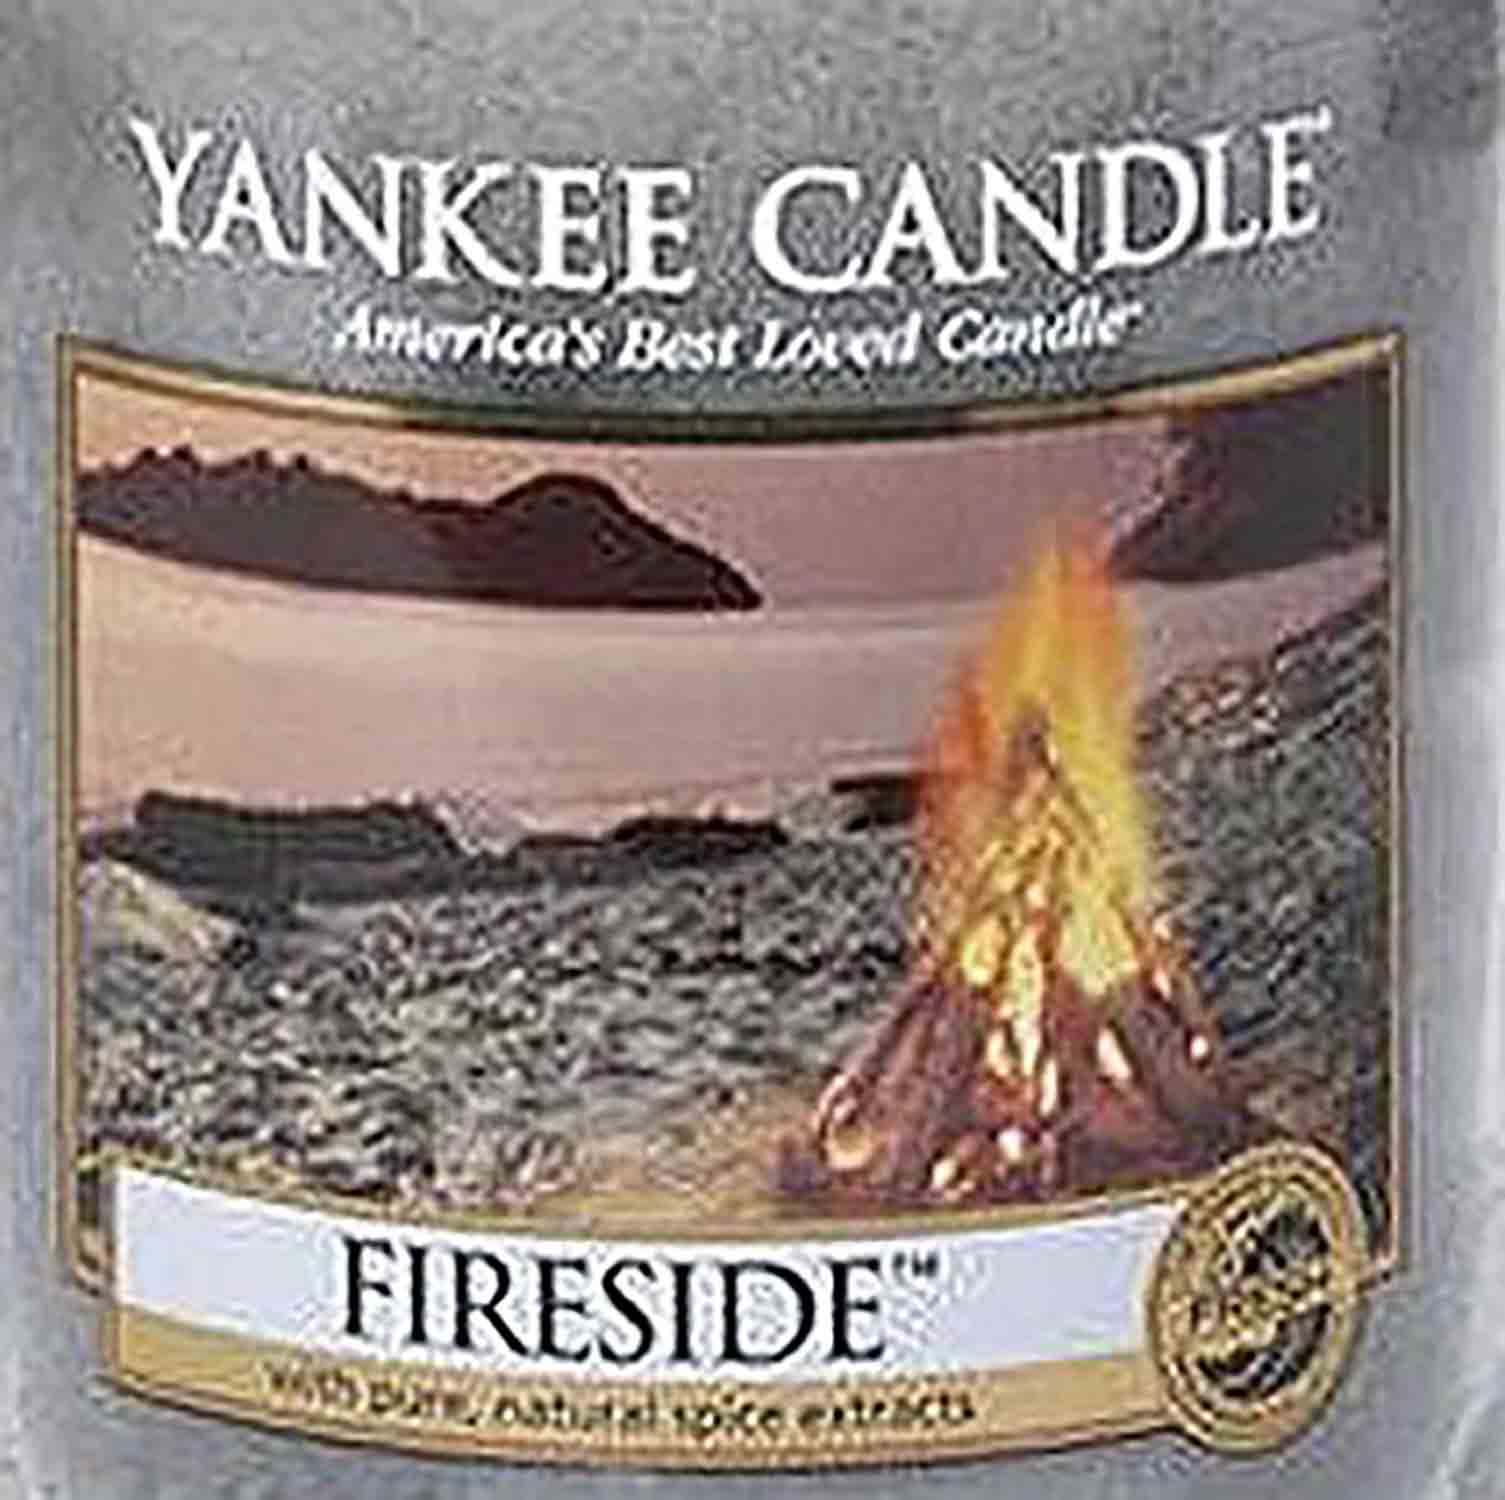 Yankee Candle Fireside USA 22 g - Crumble vosk